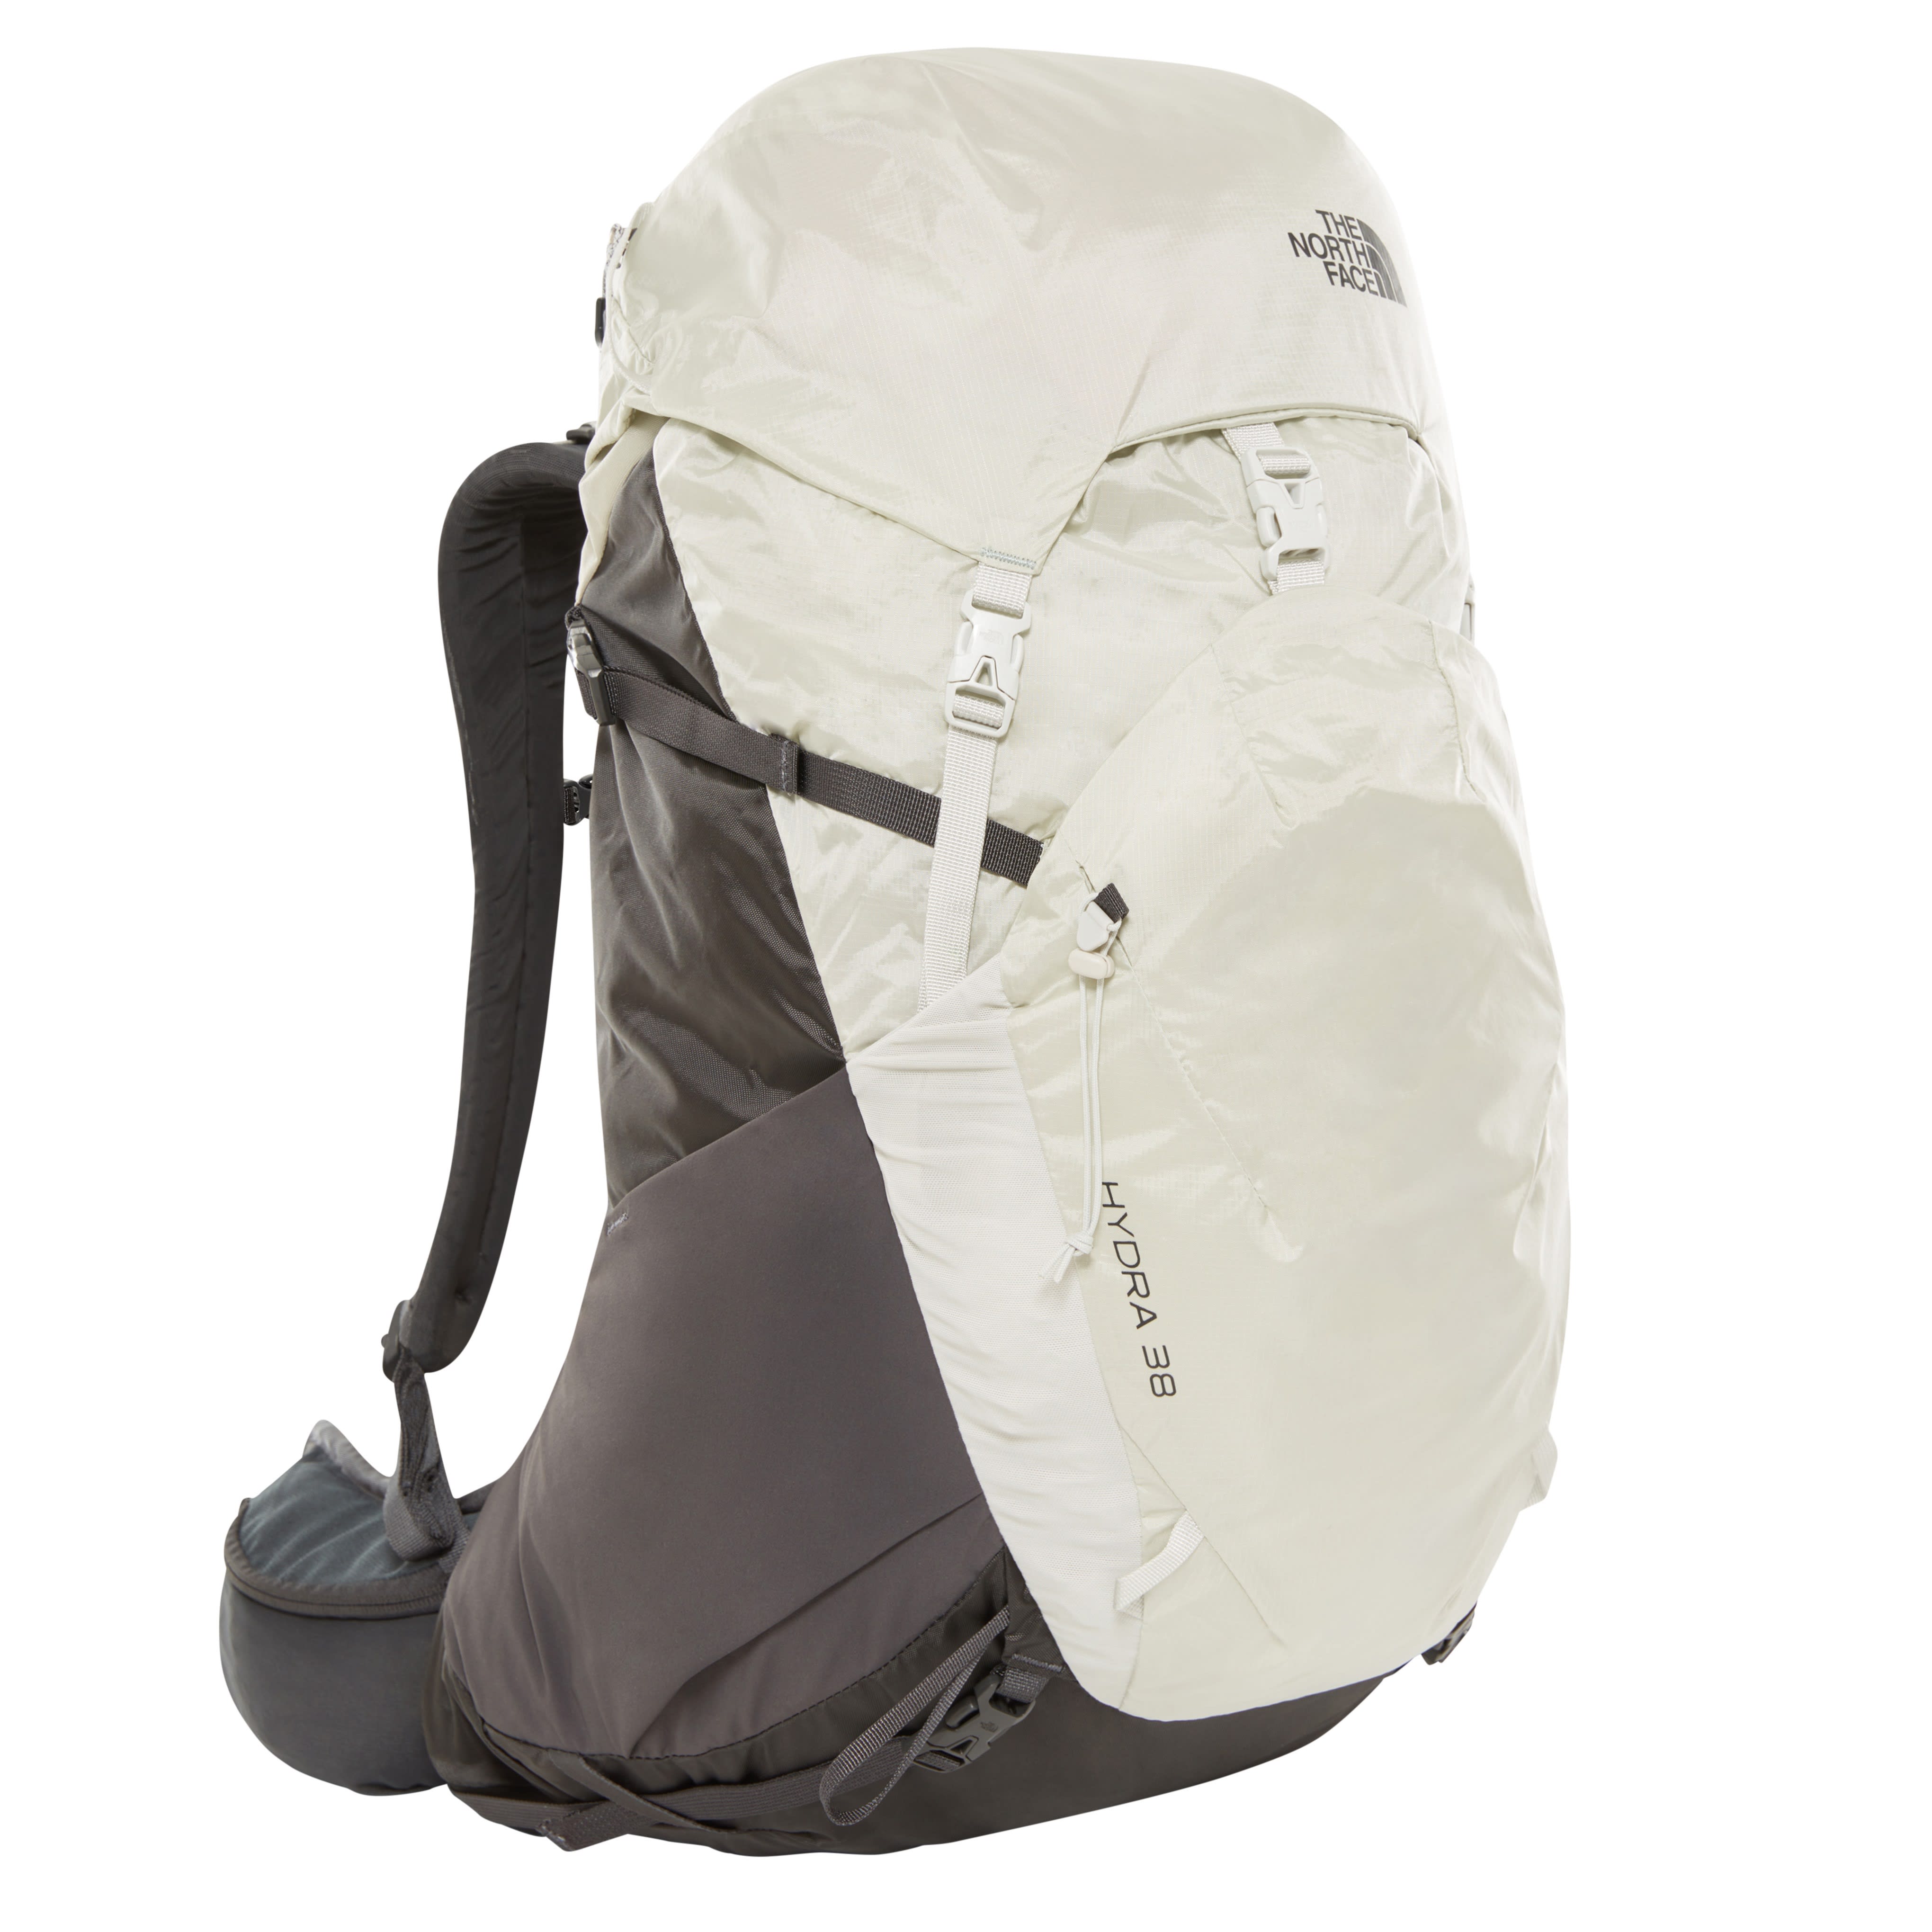 North Face Hydra 38 RC from Outnorth